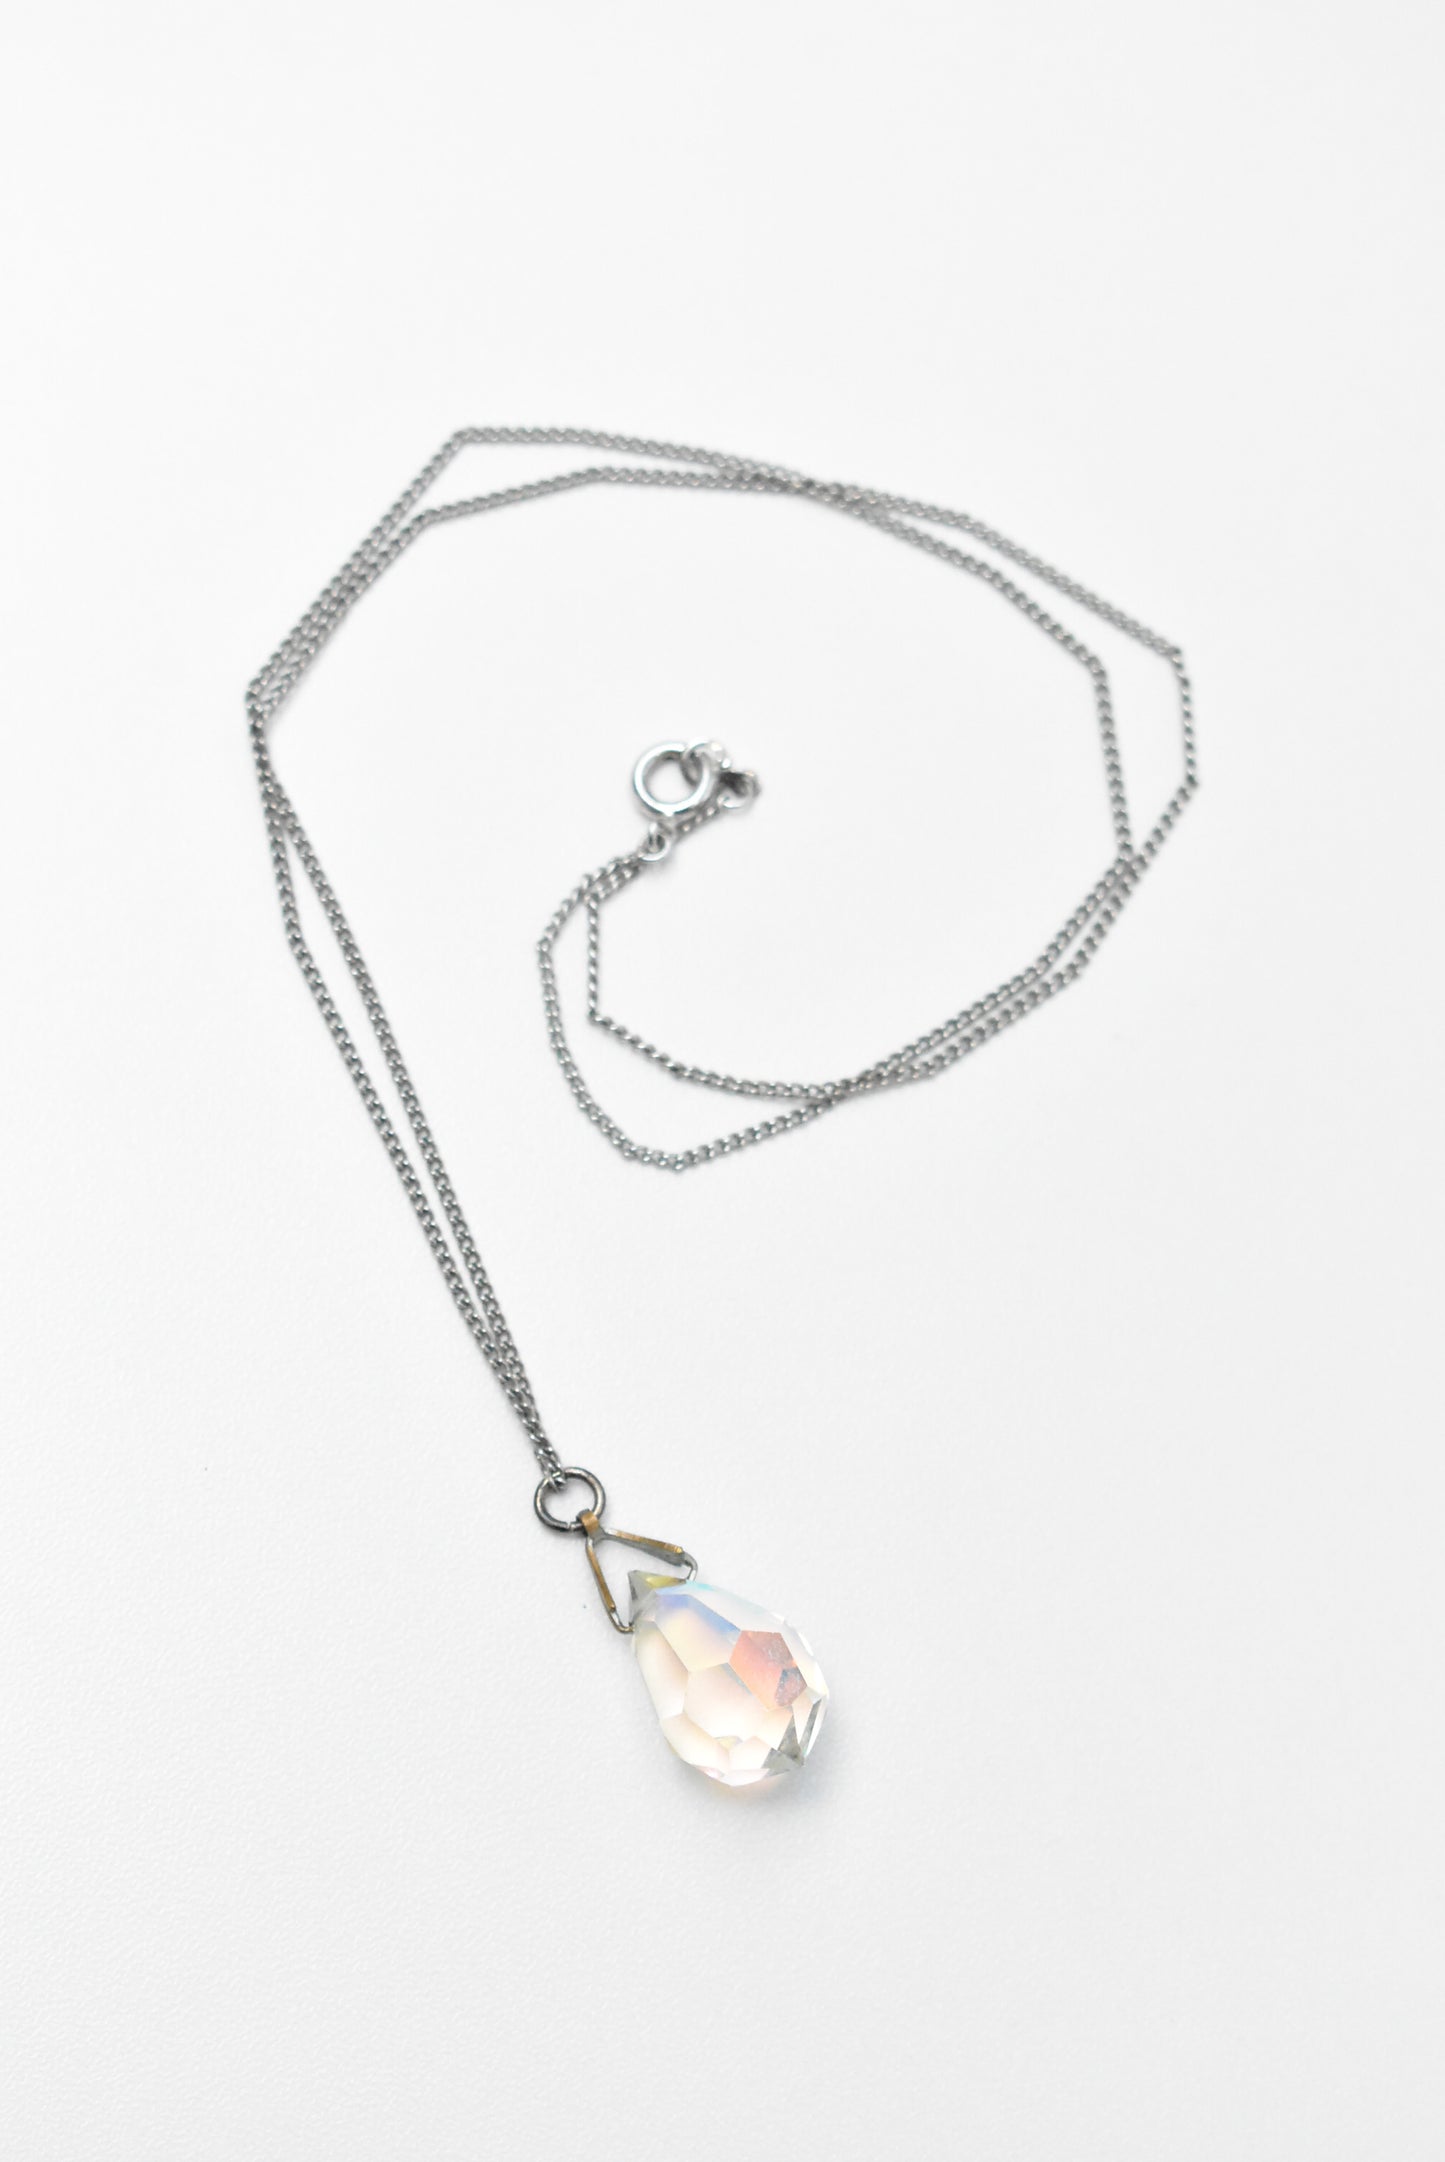 Silver chain necklace with glass crystal